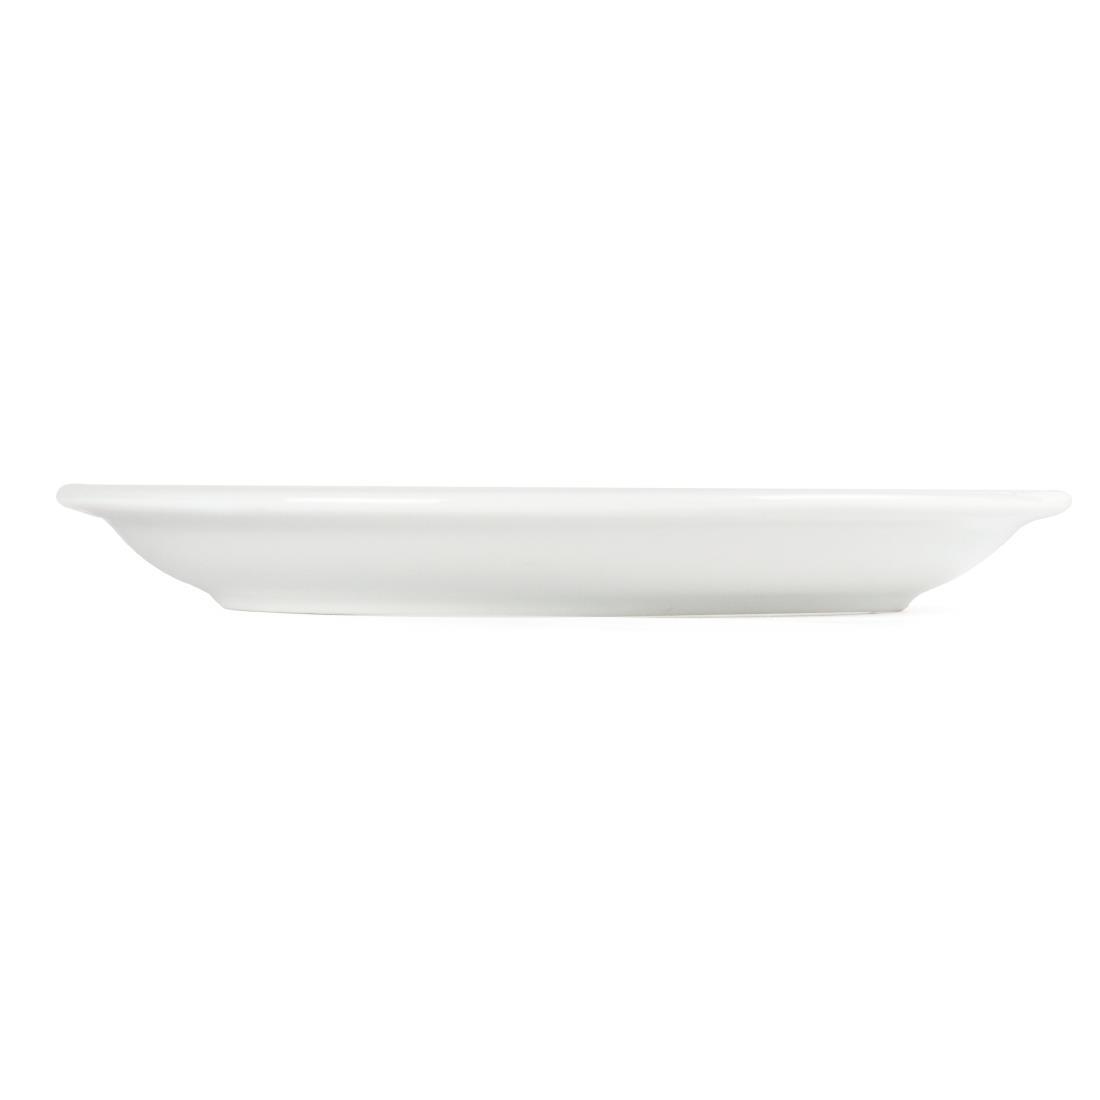 Olympia Whiteware Narrow Rimmed Plates 180mm (Pack of 12) - CB487  - 3